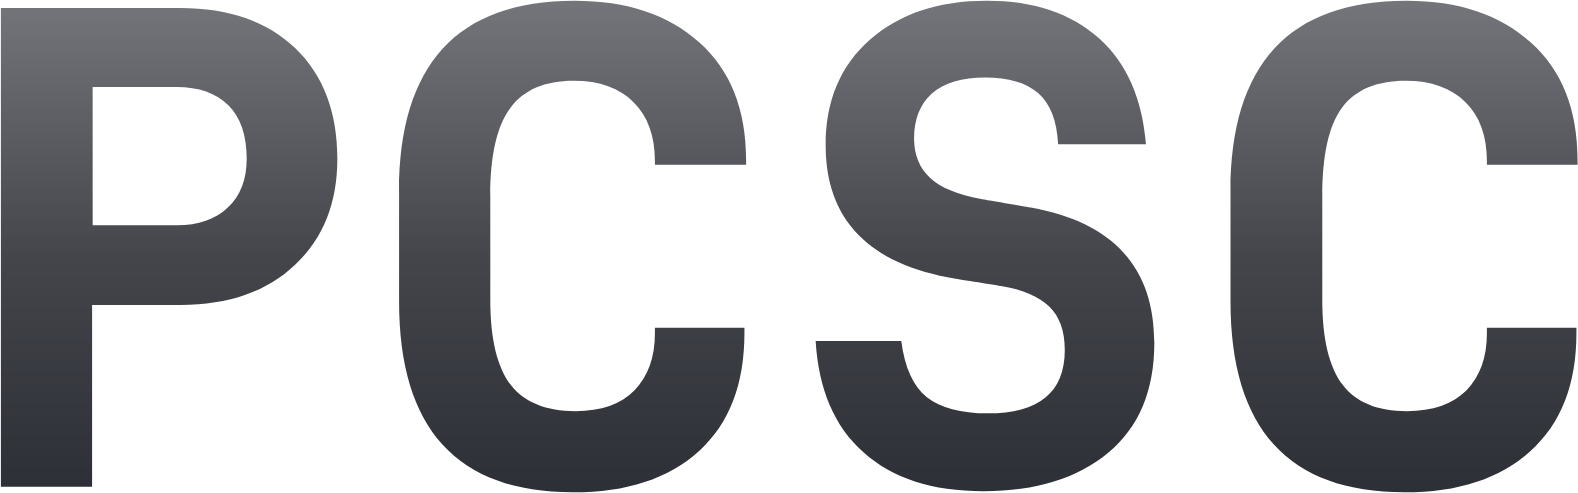 President Chain Store (PSCS) logo (PNG transparent)